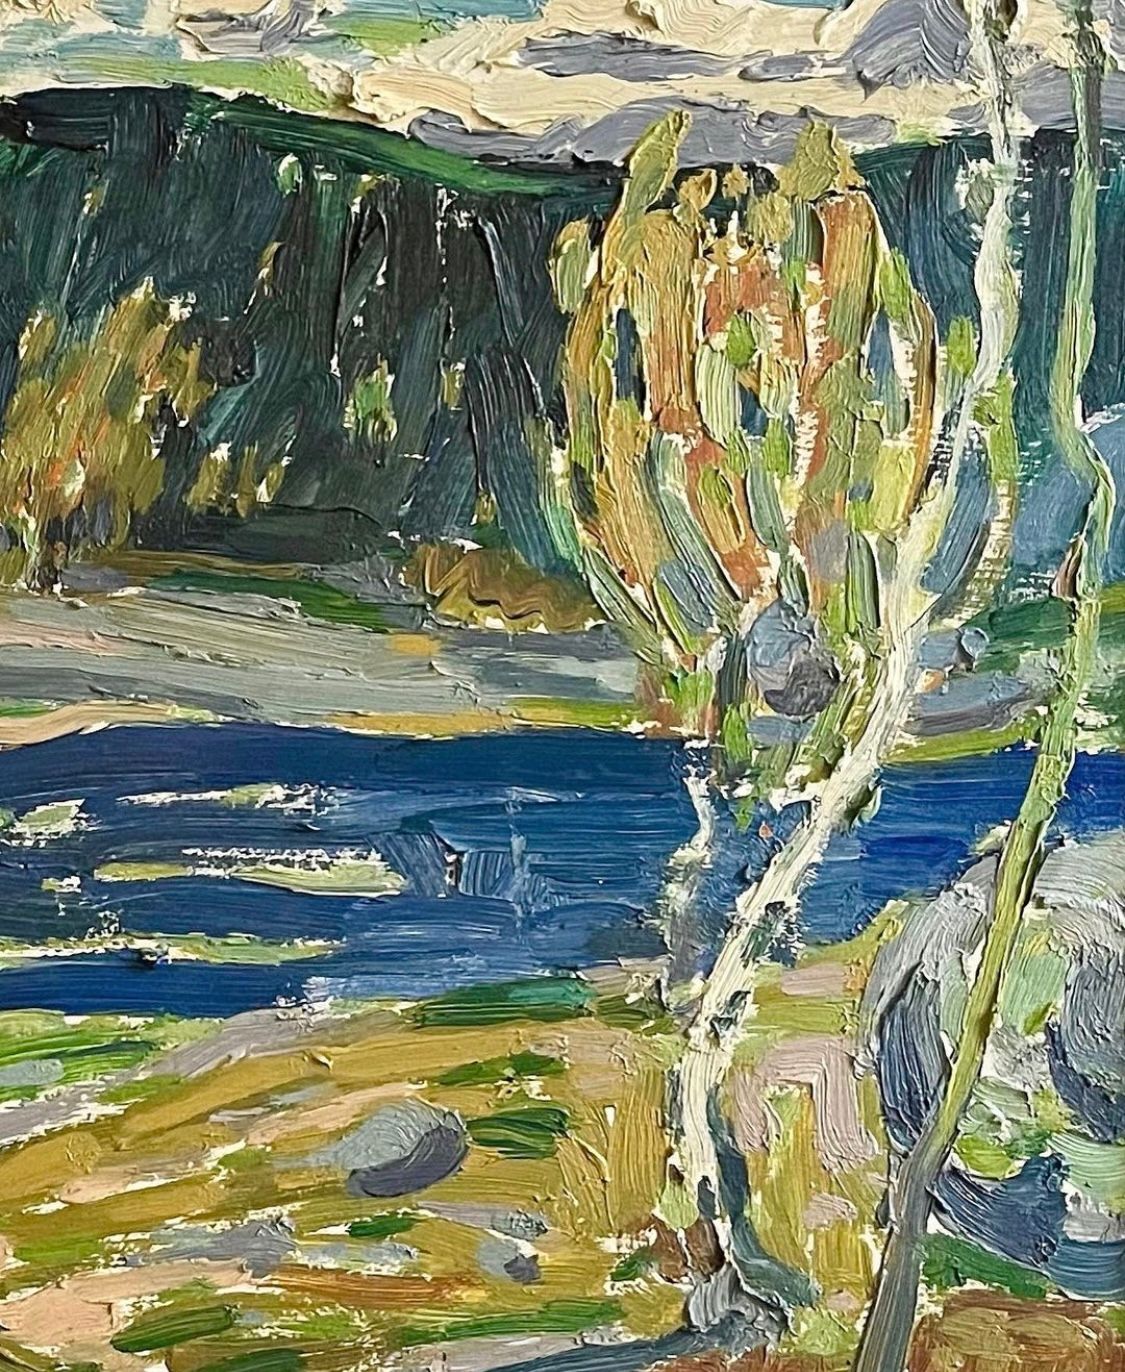 Midcentury Landscape with Birch Trees